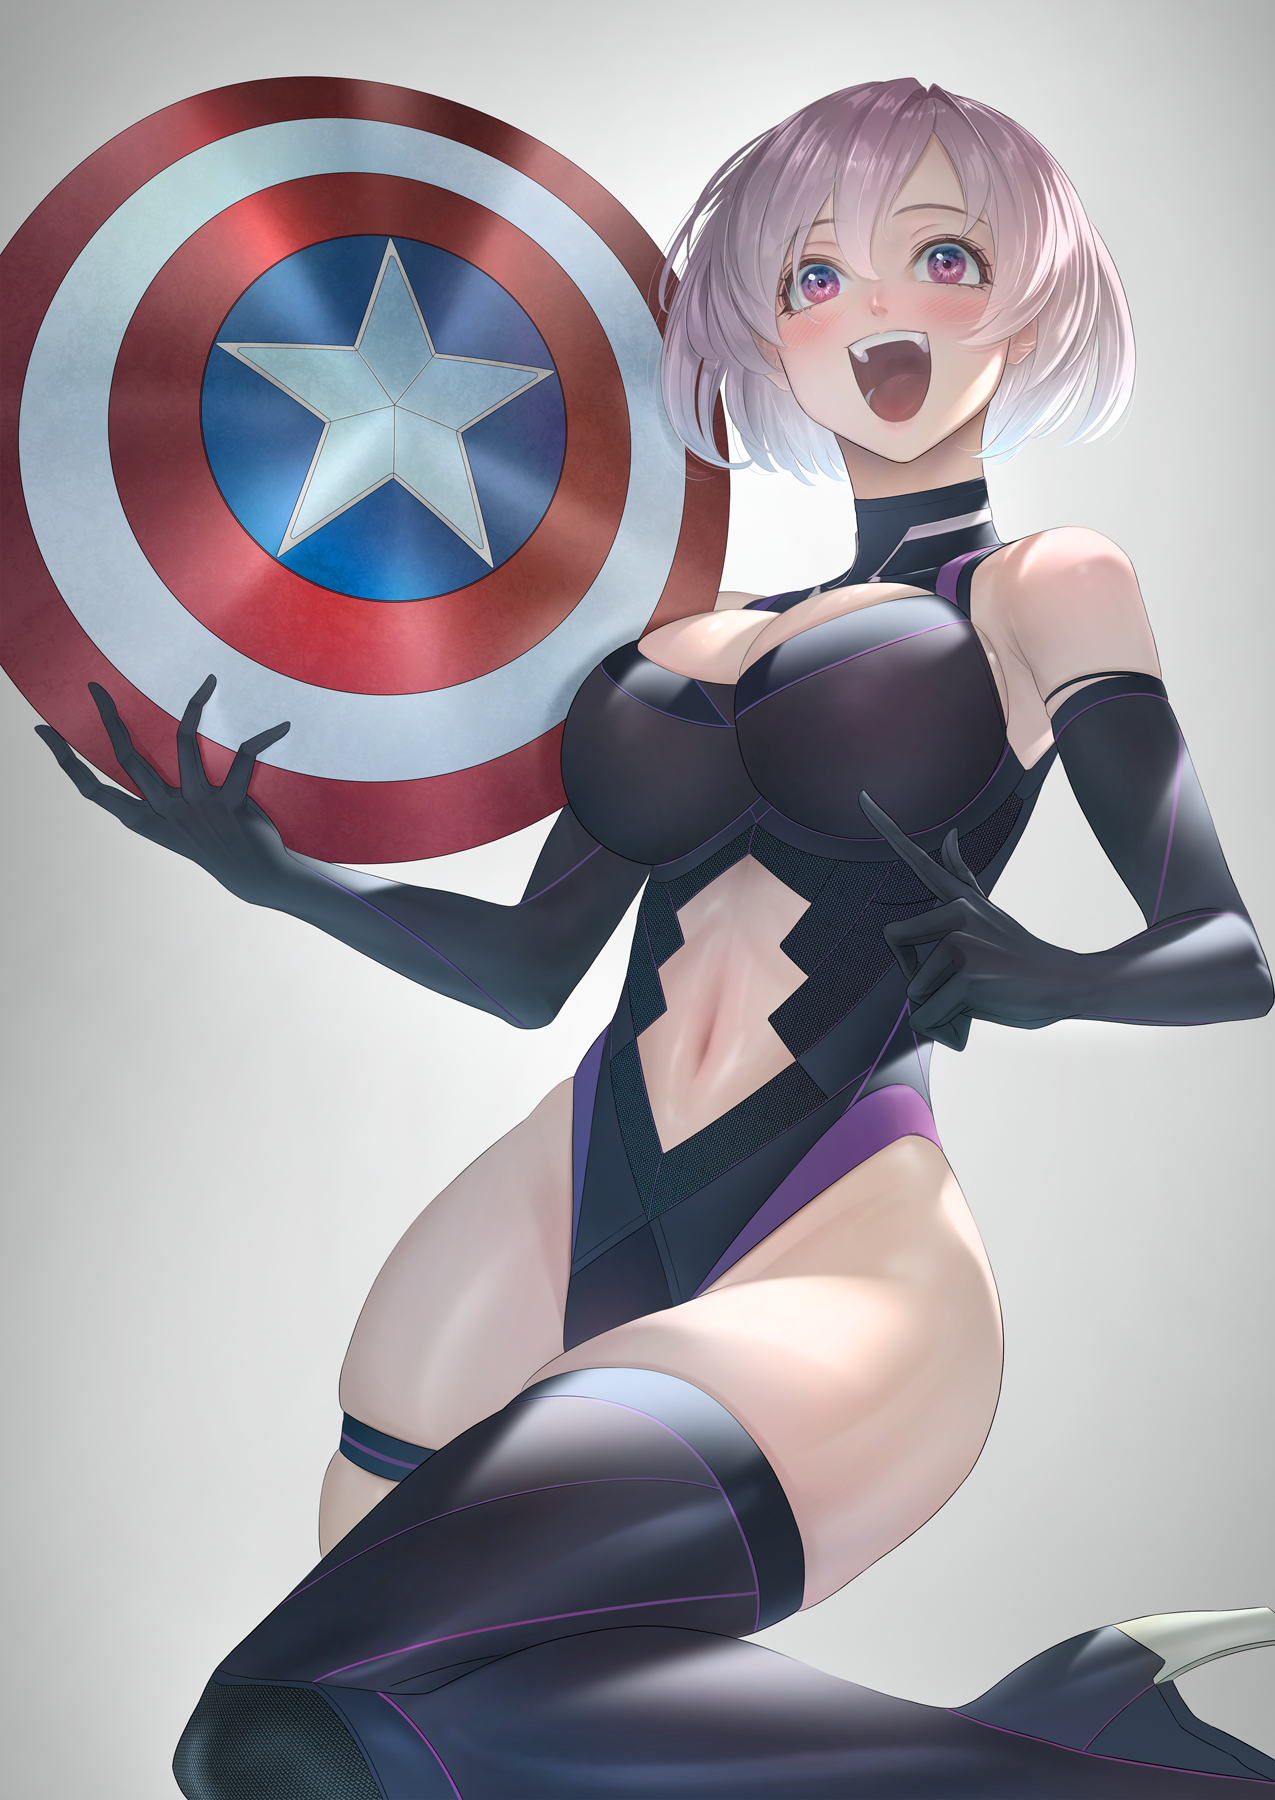 Anime 1275x1800 anime girls Fate series Mash Kyrielight Fate/Grand Order 2D big boobs thigh high boots parody cosplay Captain America Marvel Comics curvy long sleeves belly button cleavage ecchi open mouth short hair purple hair tight clothing armpits female warrior blushing looking away anime underboob thick ass thick thigh fan art I_MI_ZU